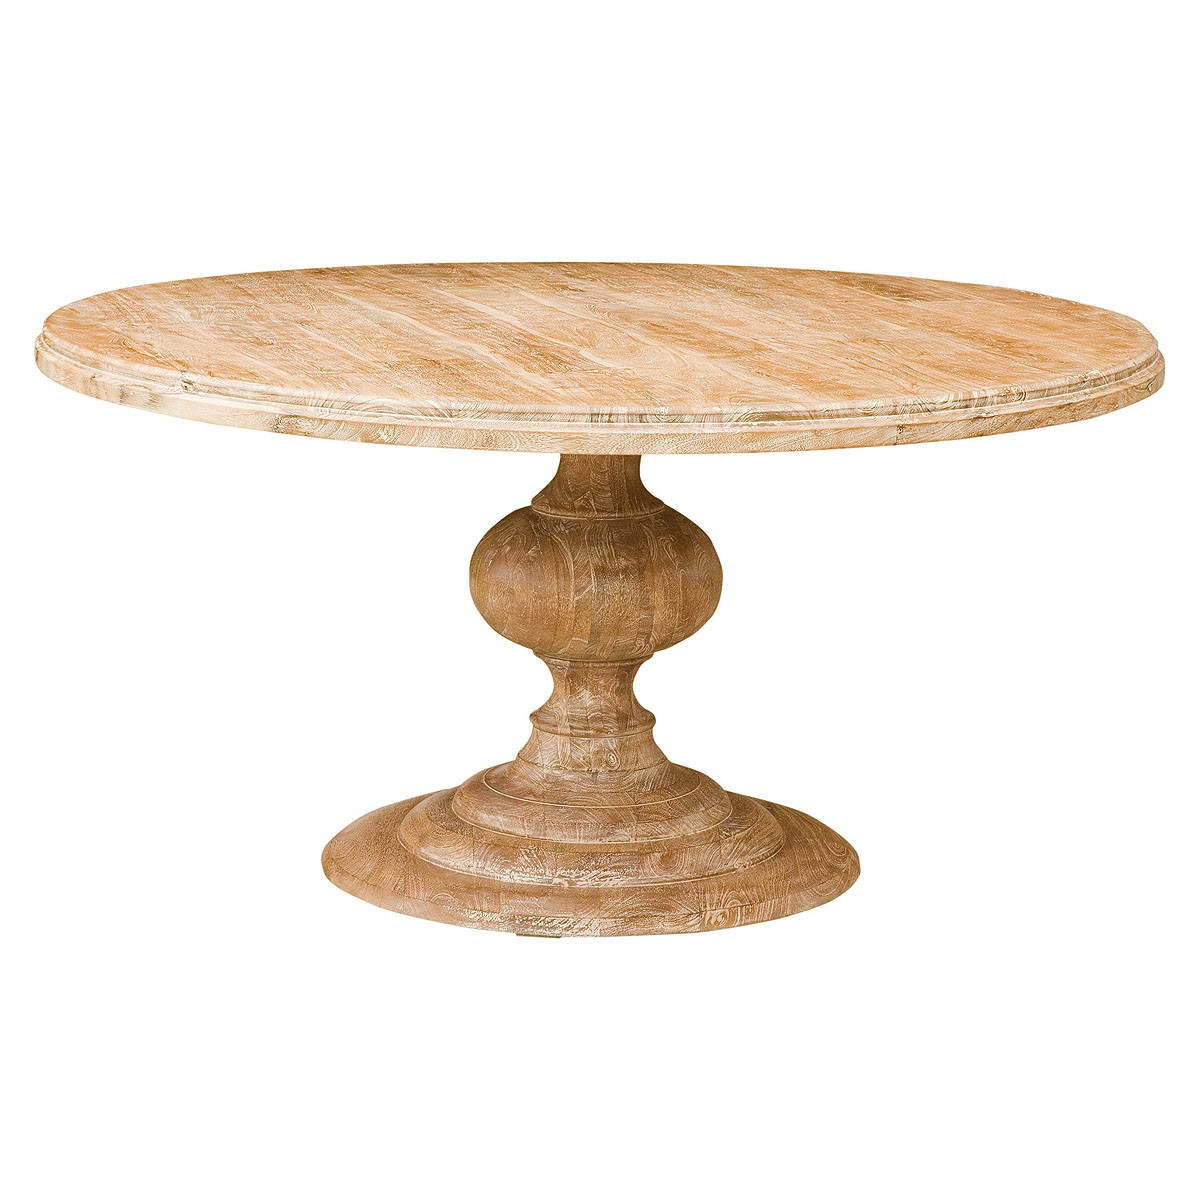 60 inch round tables